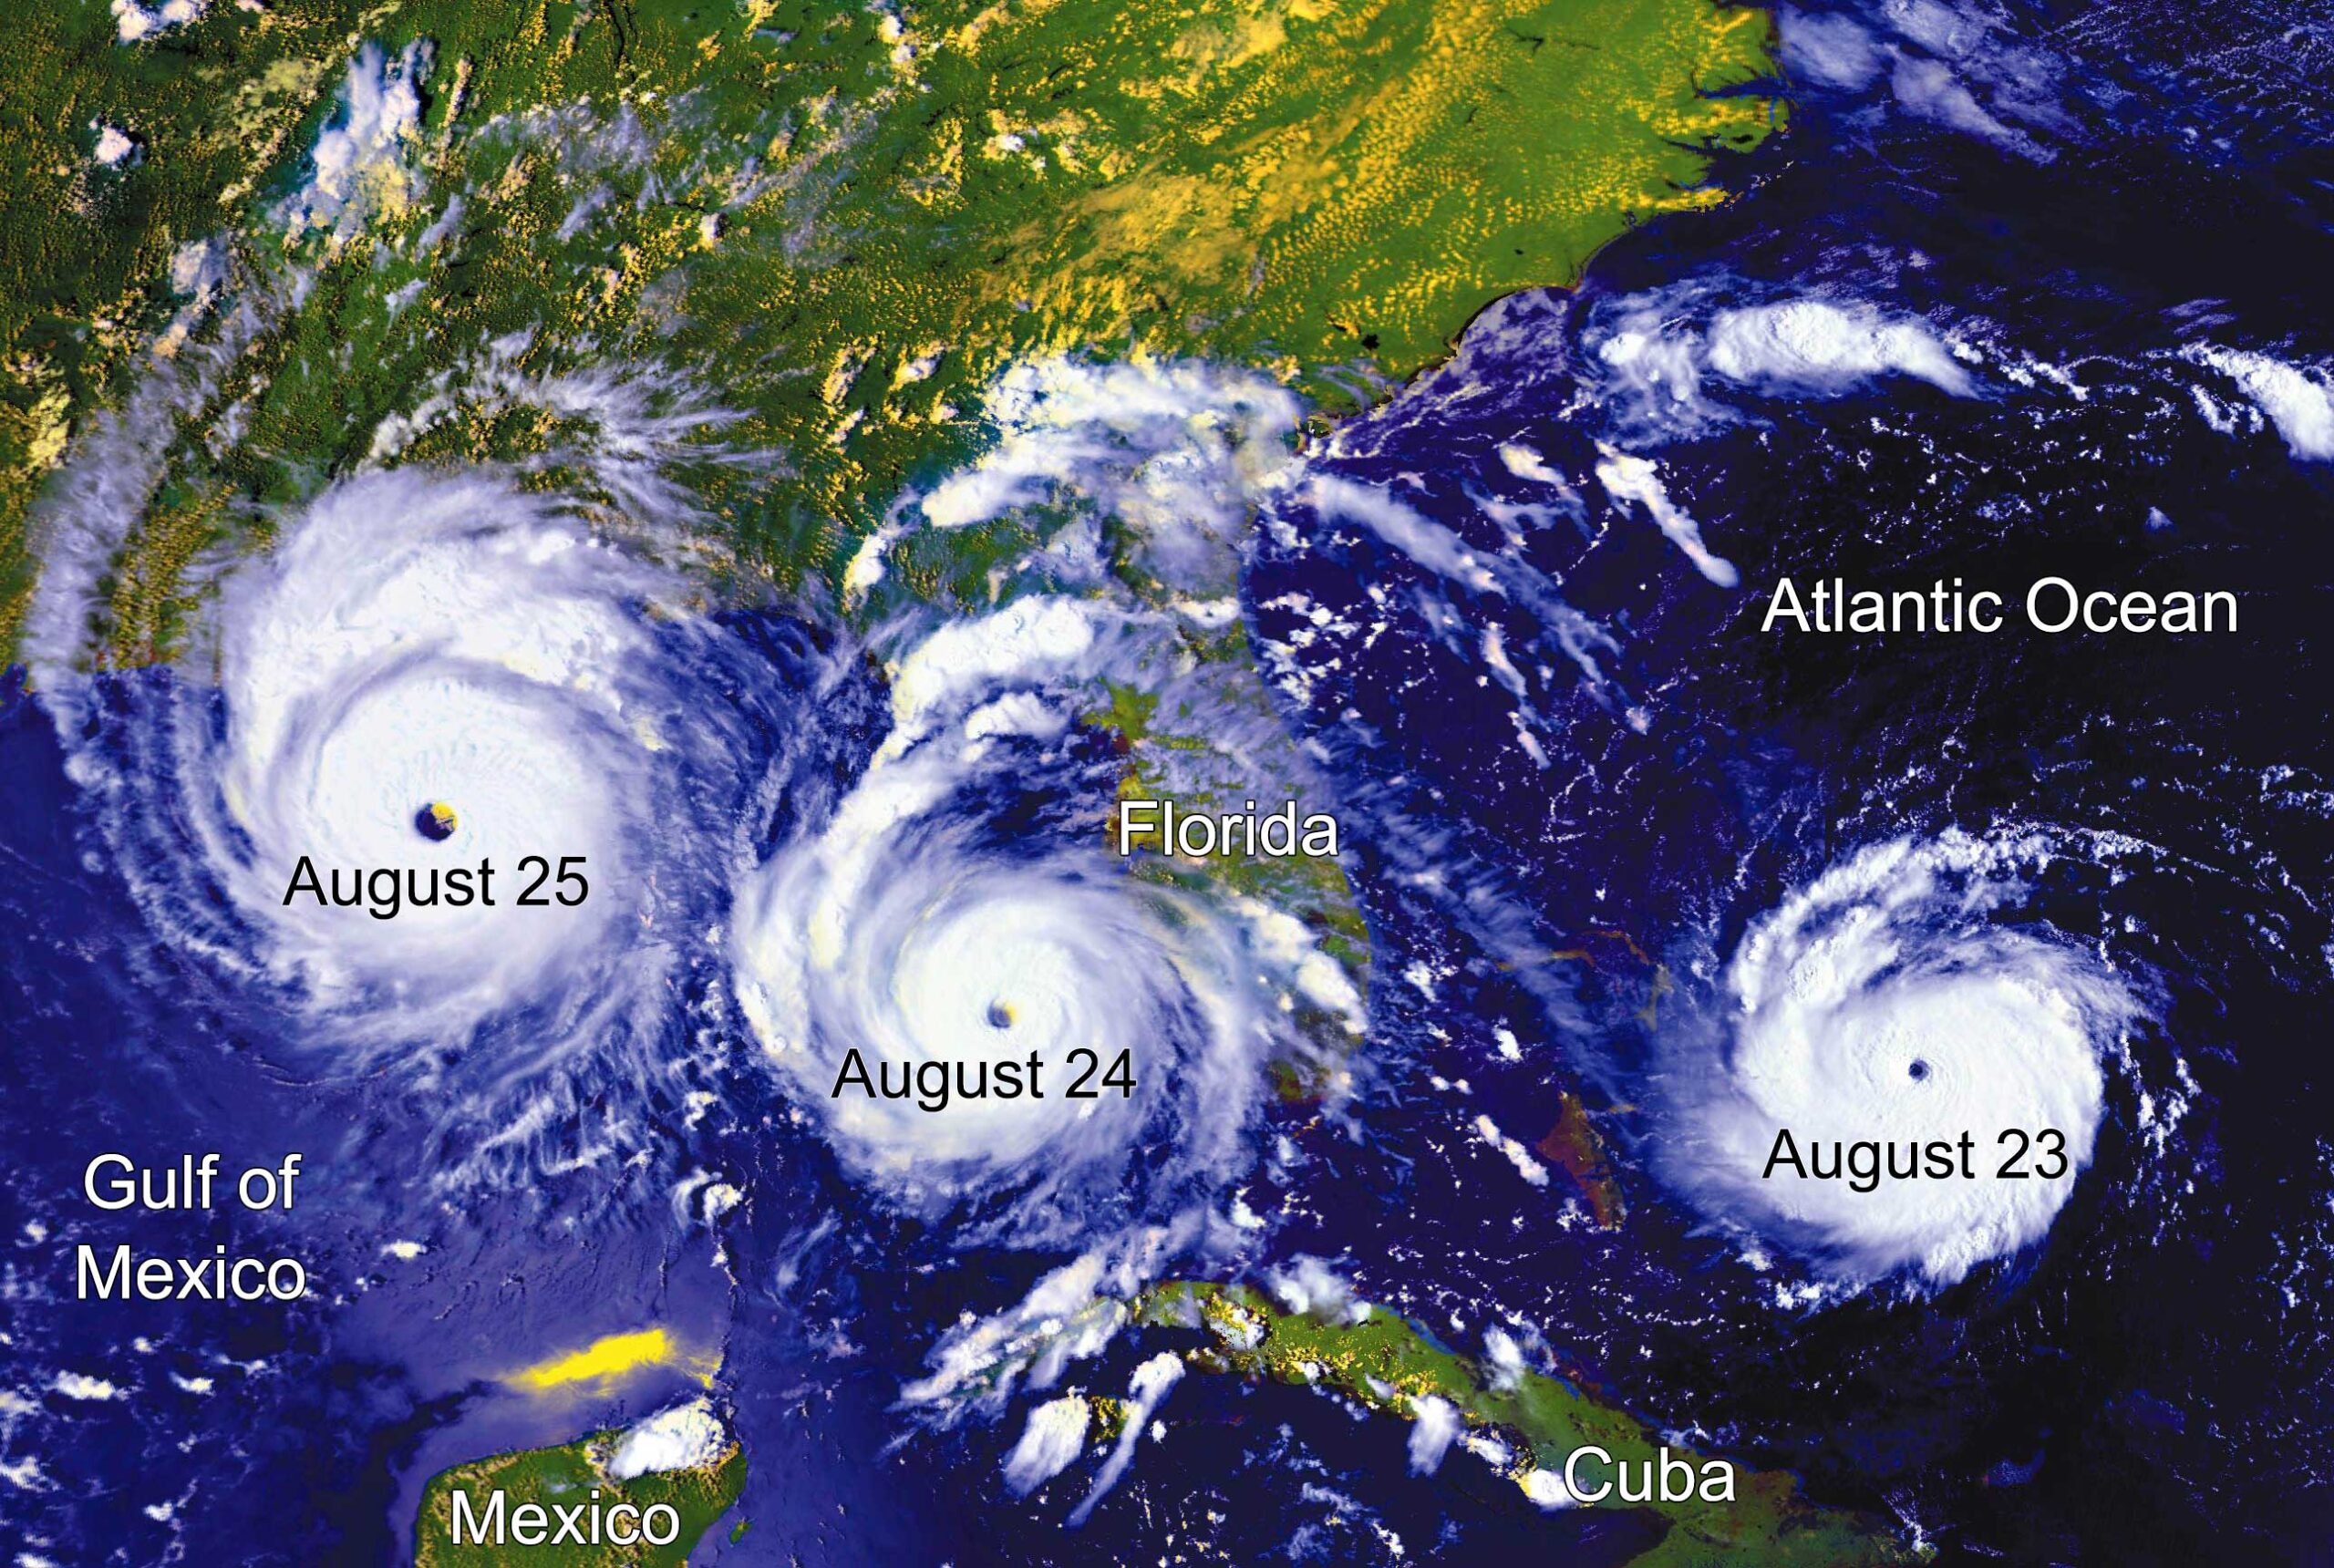 Satellite image of Hurricane Andrew over 3 days in 1992. The storm moves from the Atlantic Ocean, over Florida, and into the Gulf of Mexico.